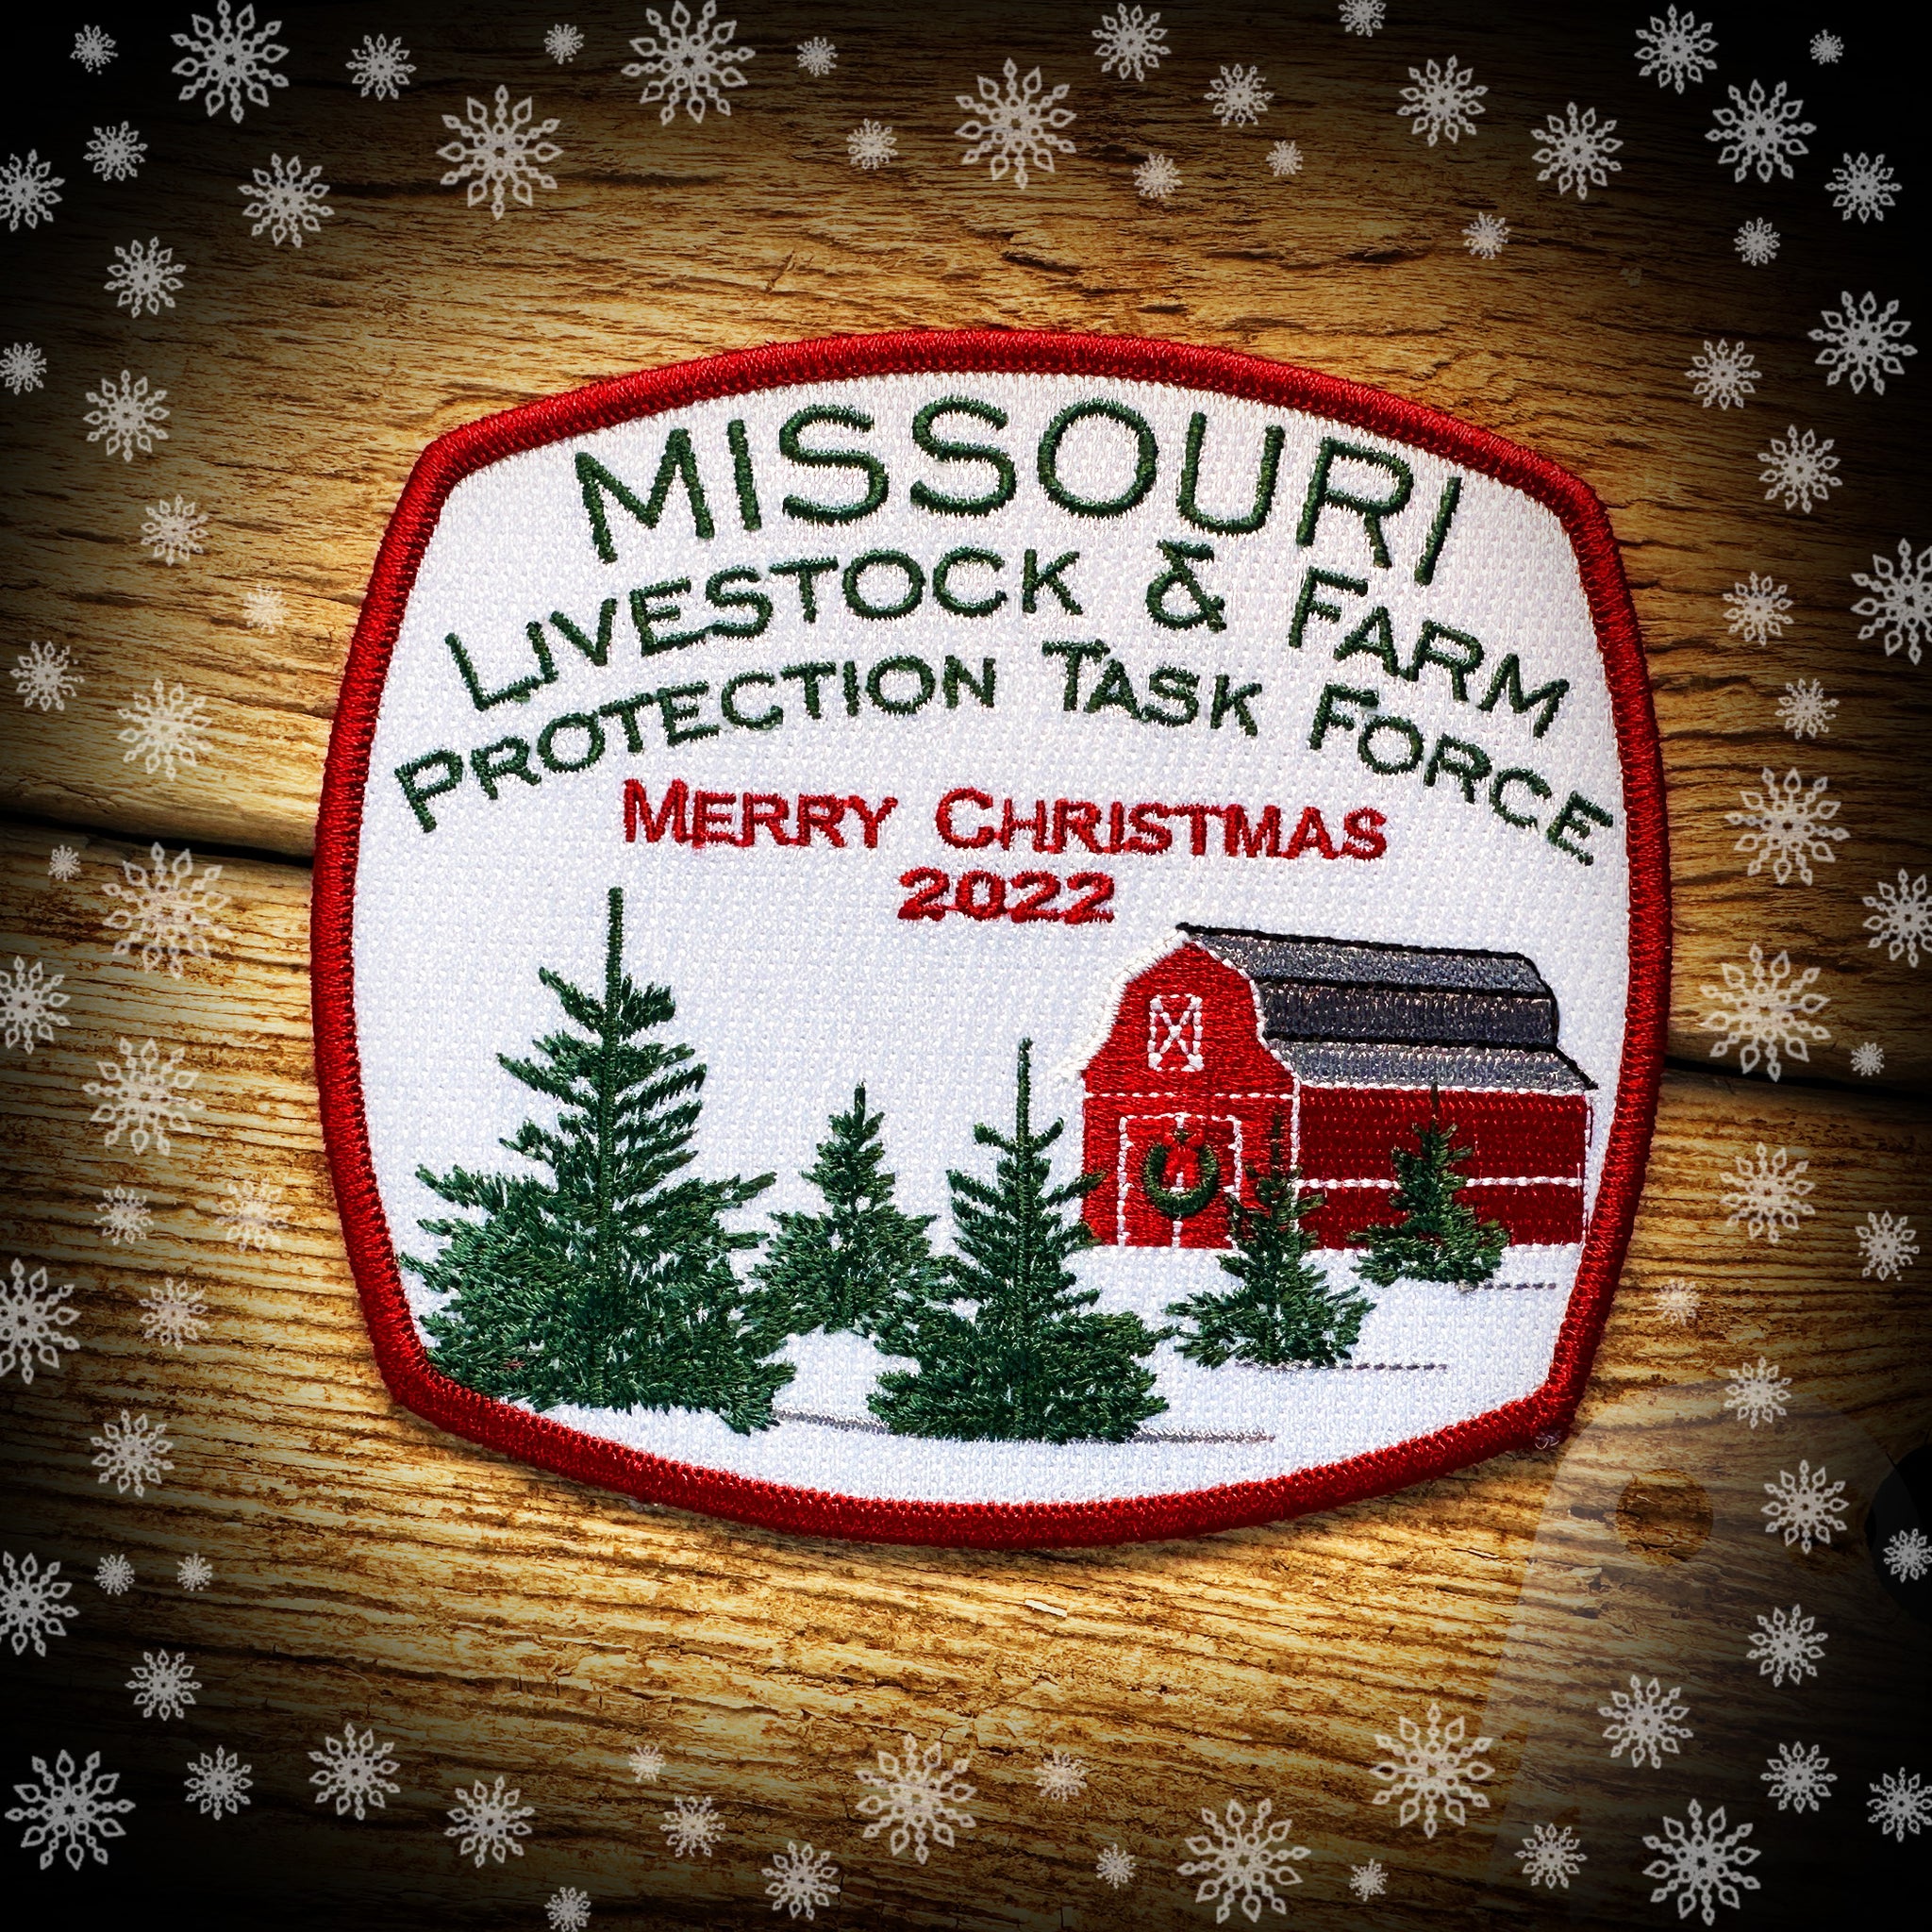 Missouri Livestock and Farm Protection Police Task Force 2022 Christmas Patch - Authentic - Limited - INDIVIDUALLY NUMBERED